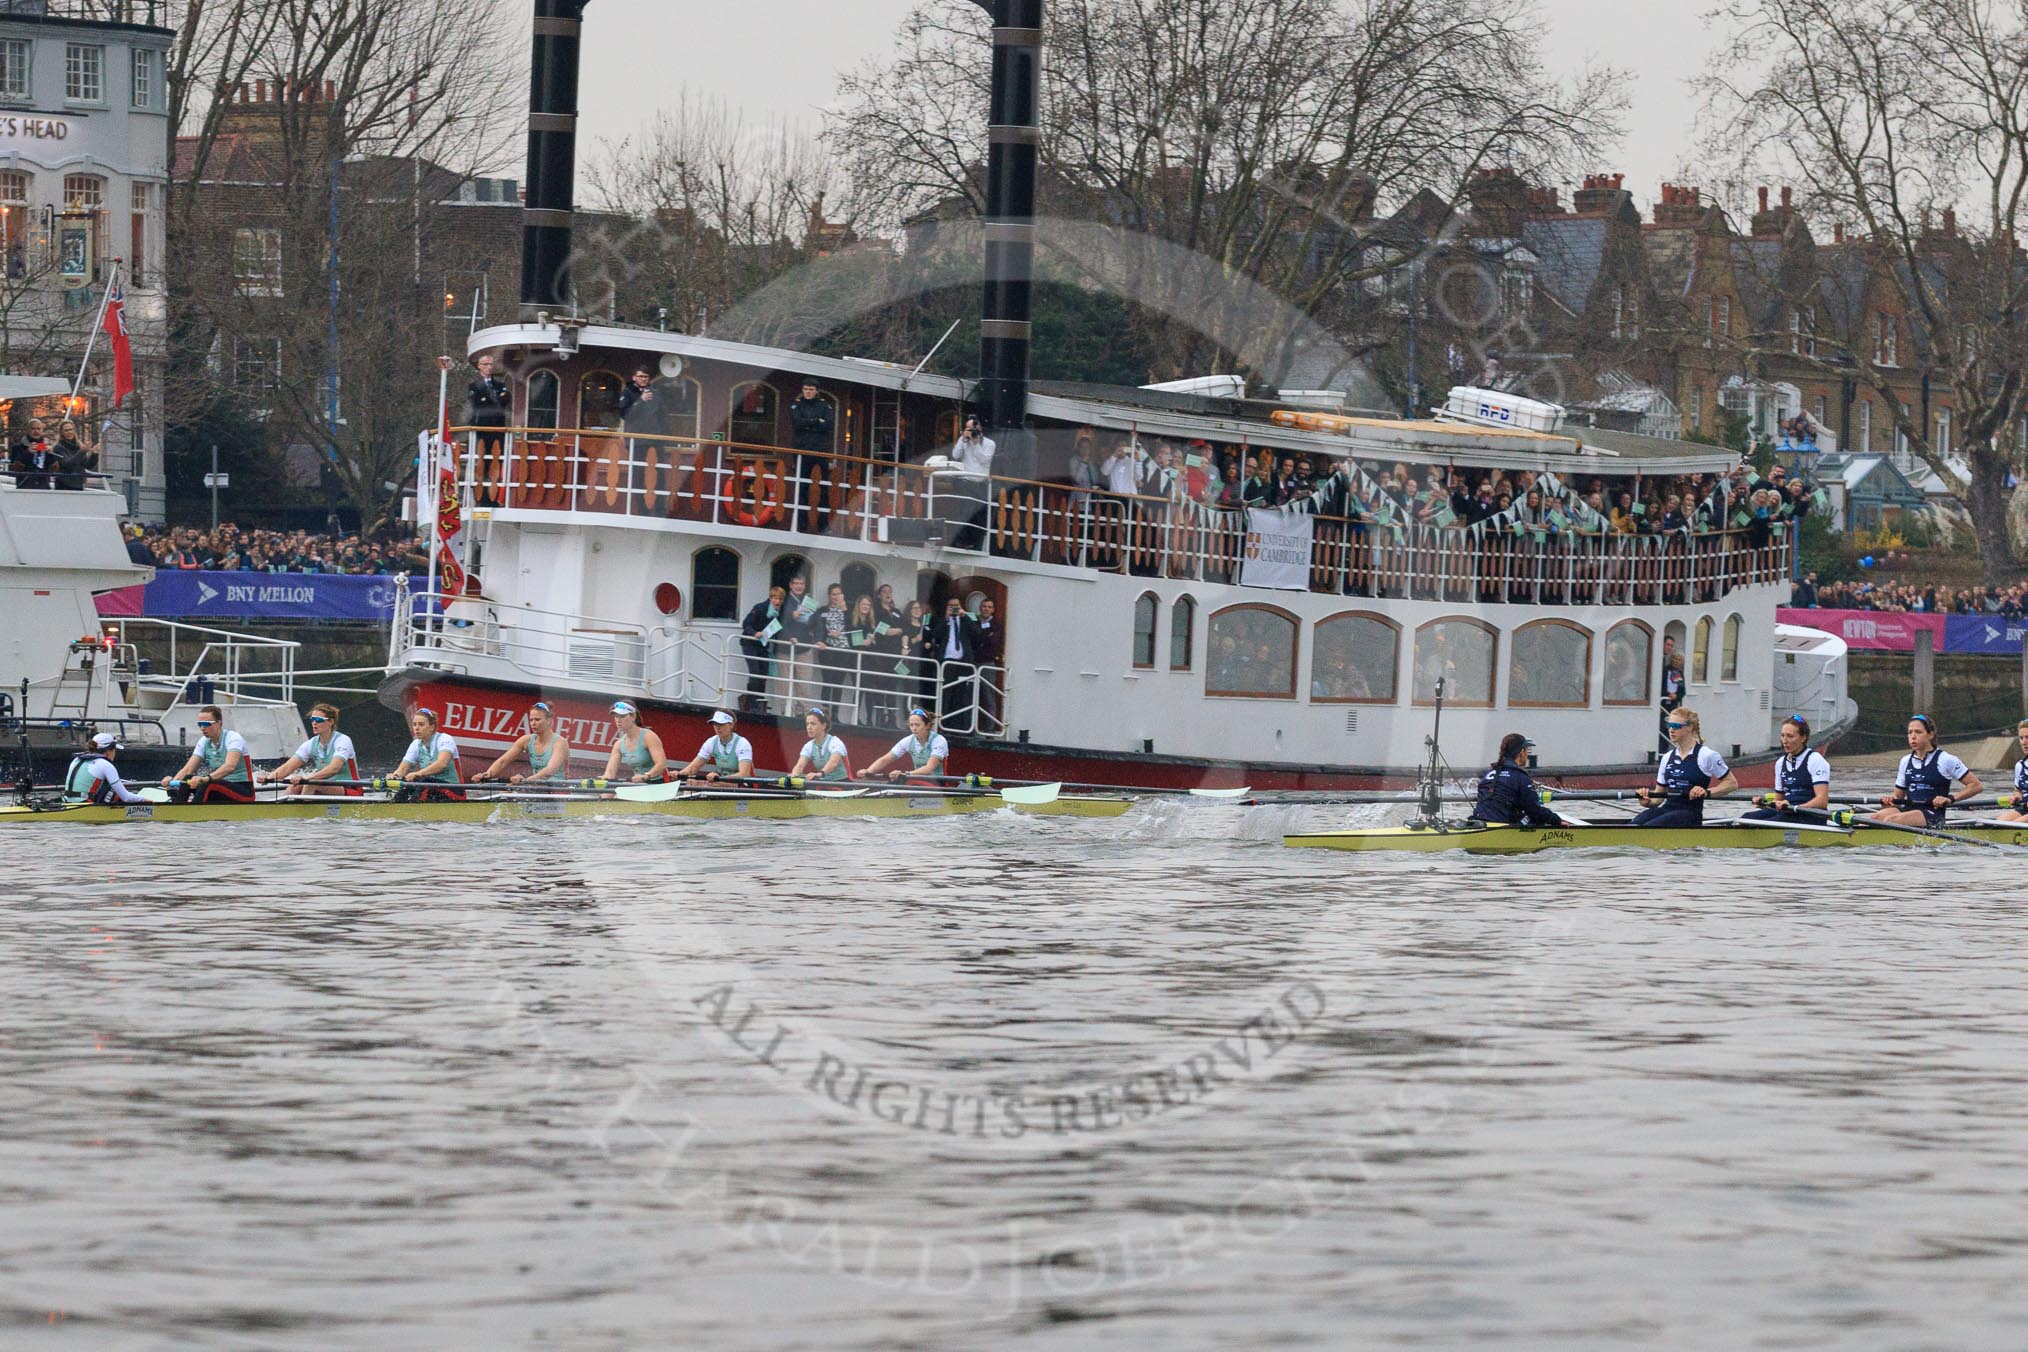 The Cancer Research UK Women's Boat Race 2018: Seconds after the start of the Women's Boat Race, the boats passing the two passenger ships carrying friends and families.
River Thames between Putney Bridge and Mortlake,
London SW15,

United Kingdom,
on 24 March 2018 at 16:31, image #165